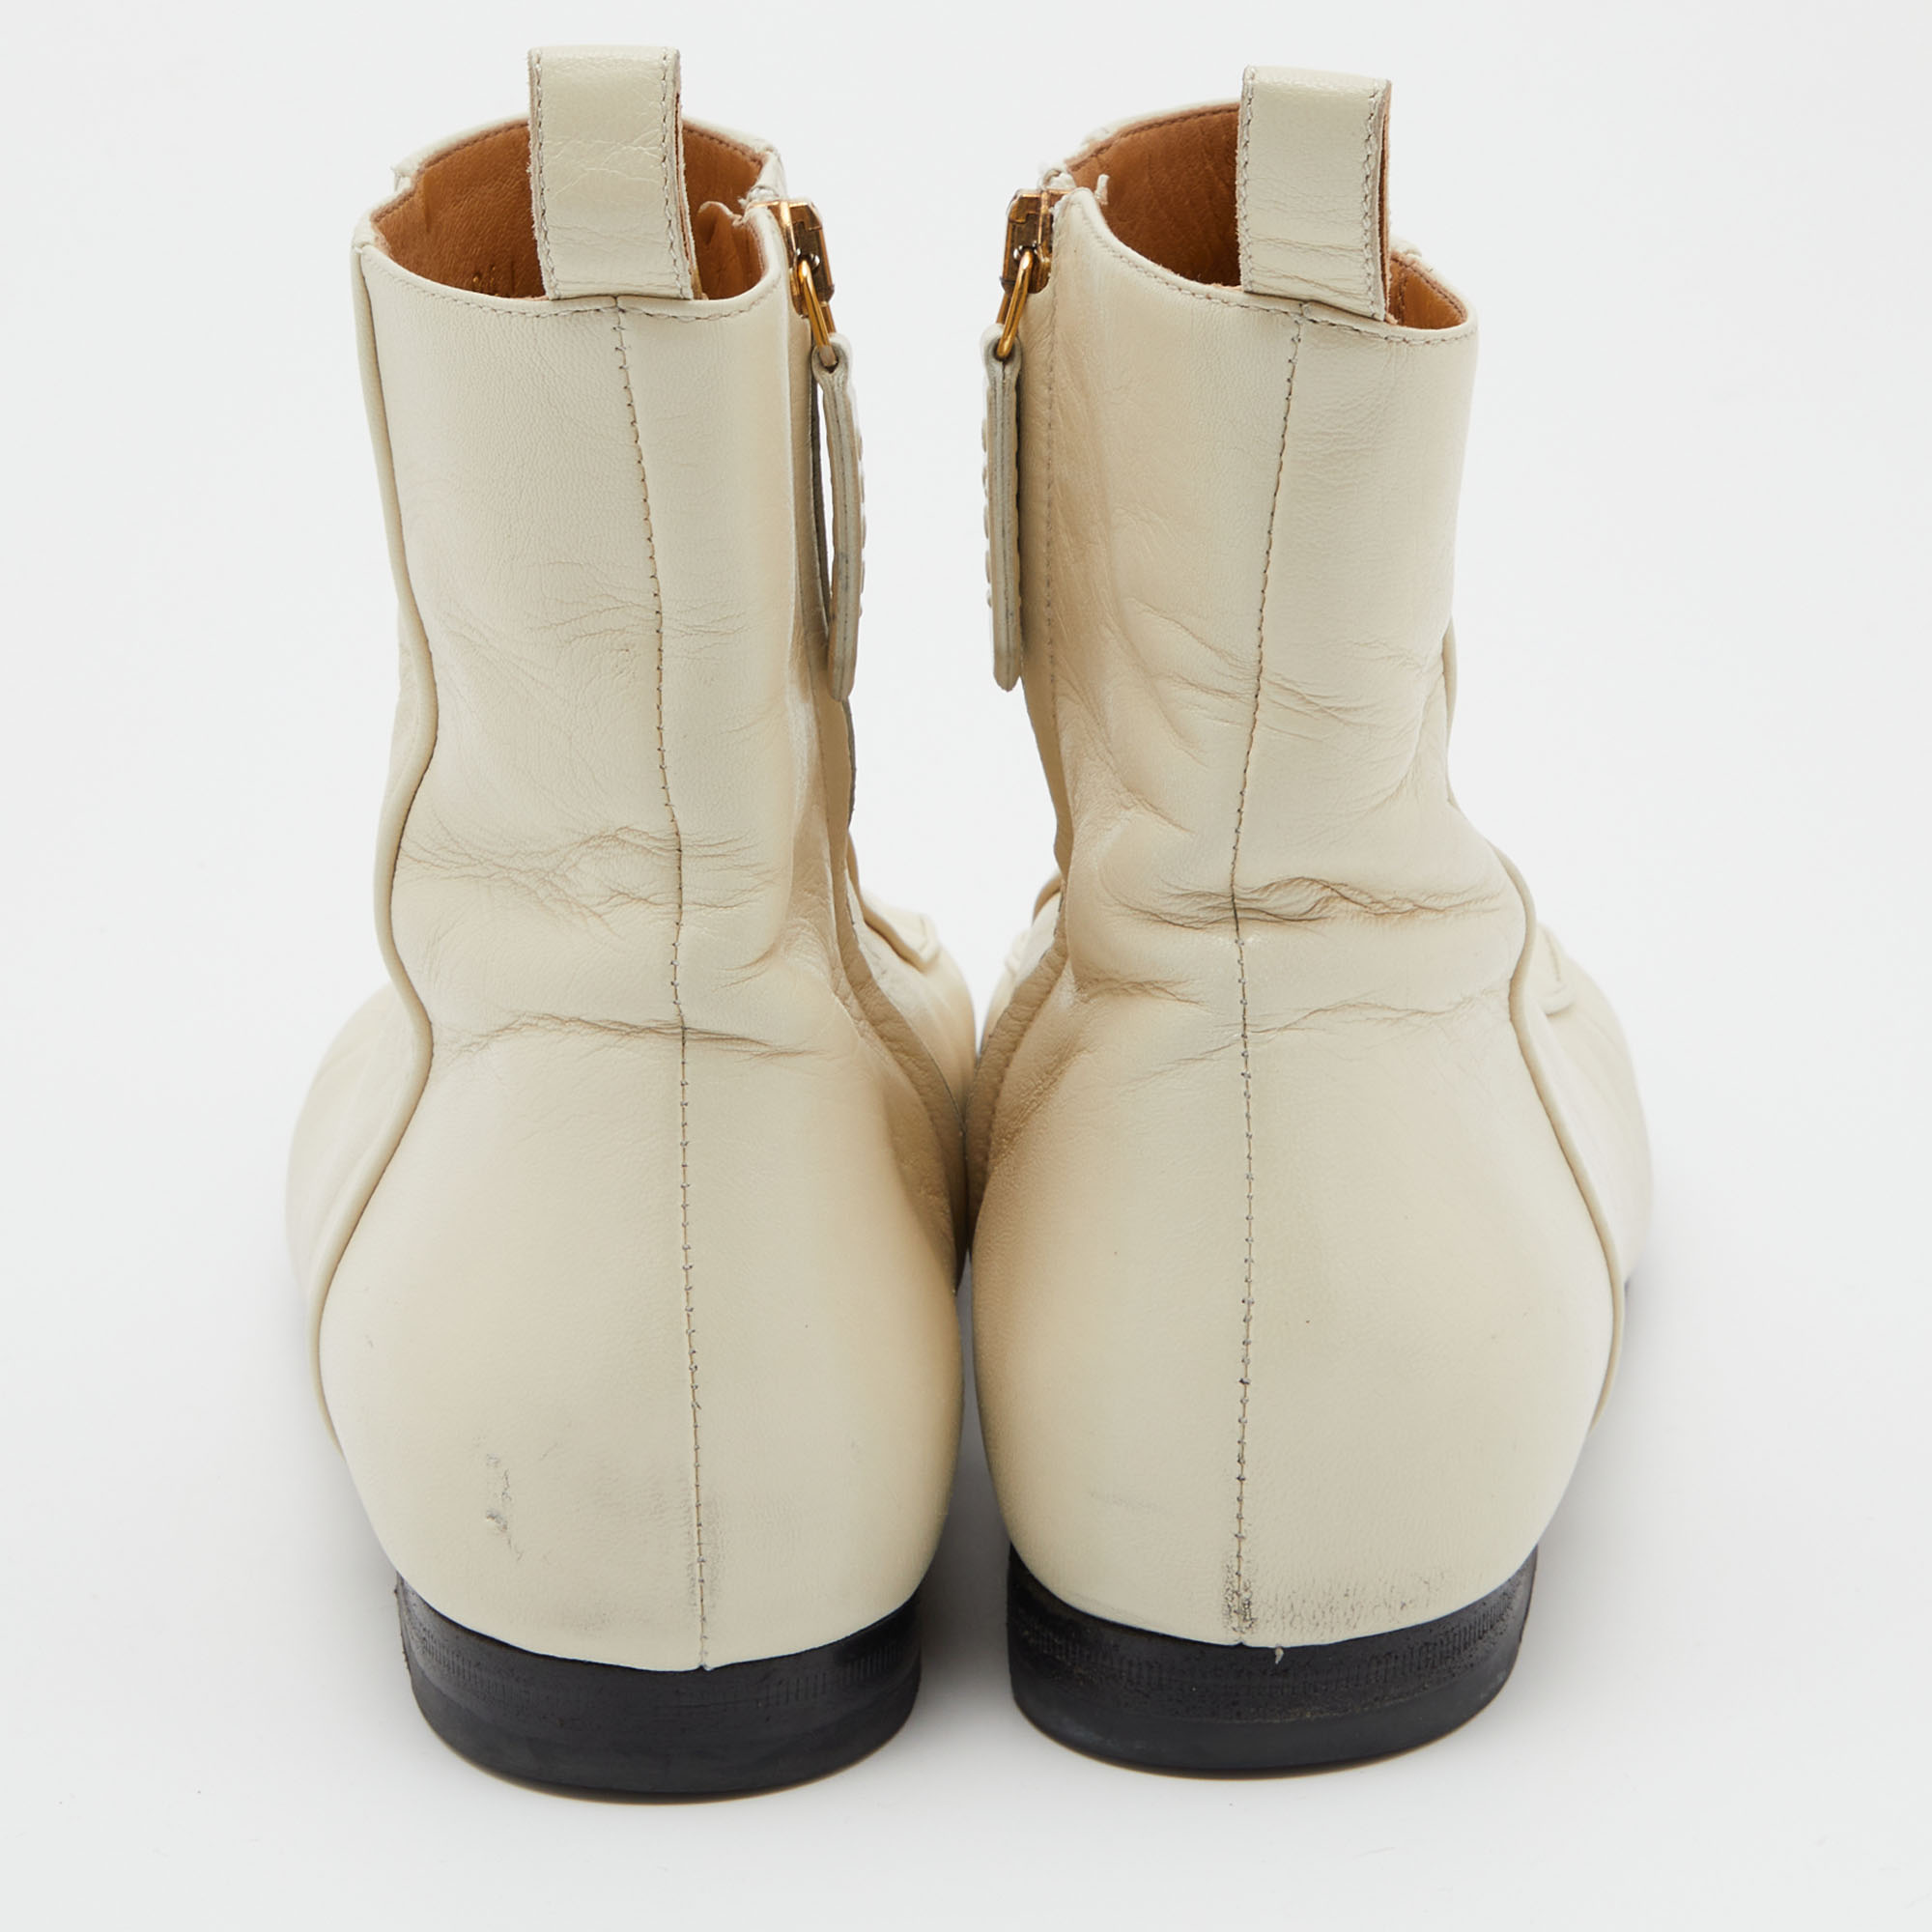 Gucci Cream Leather Horsebit Ankle Boots Size 38